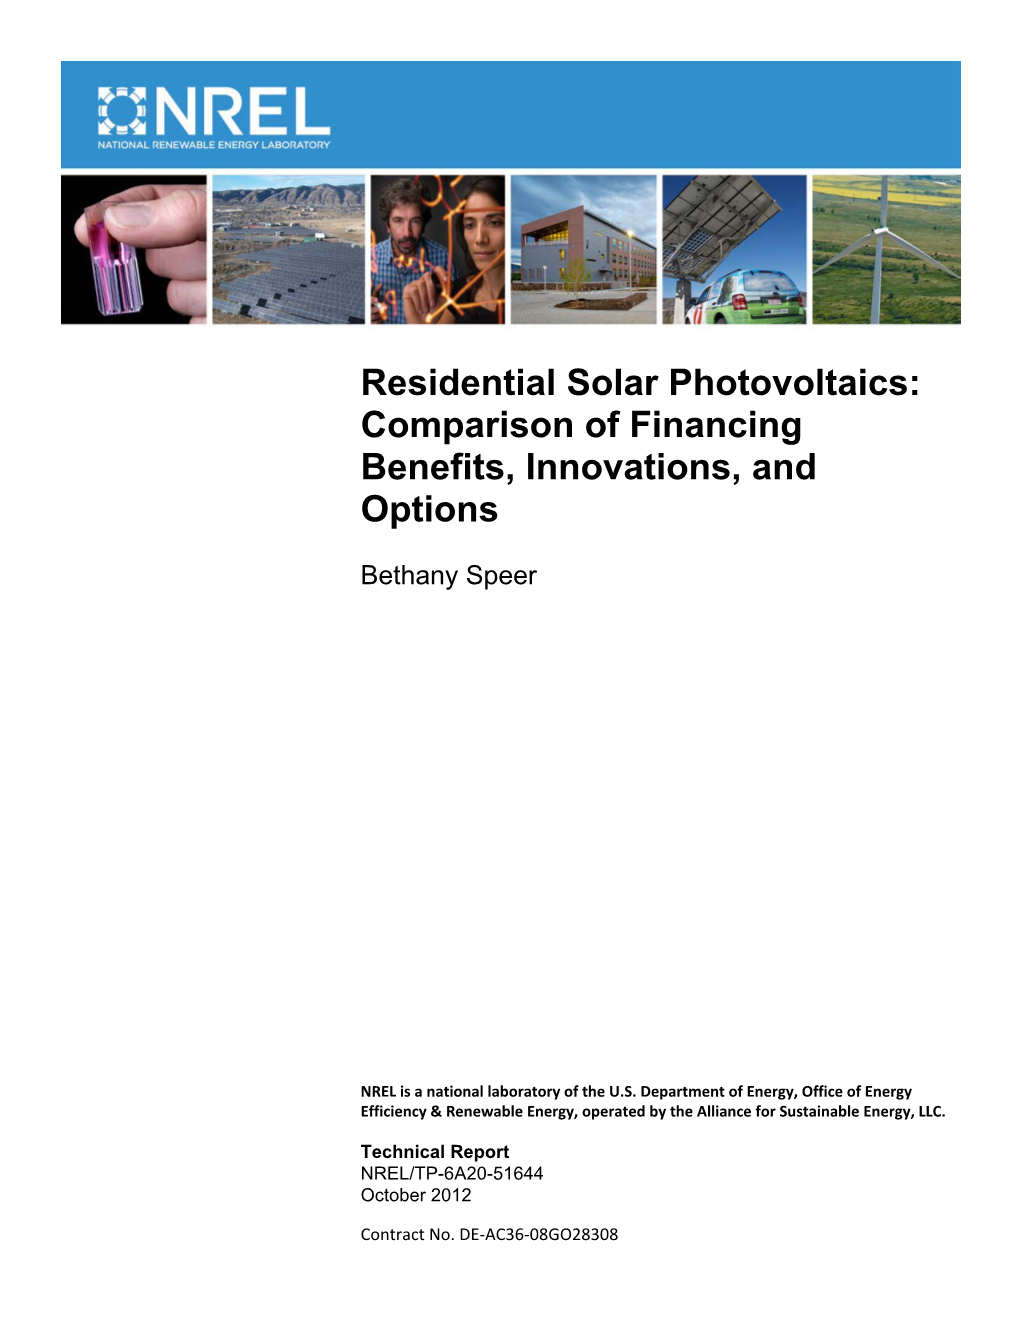 Residential Solar Photovoltaics: Comparison of Financing Benefits, Innovations, and Options